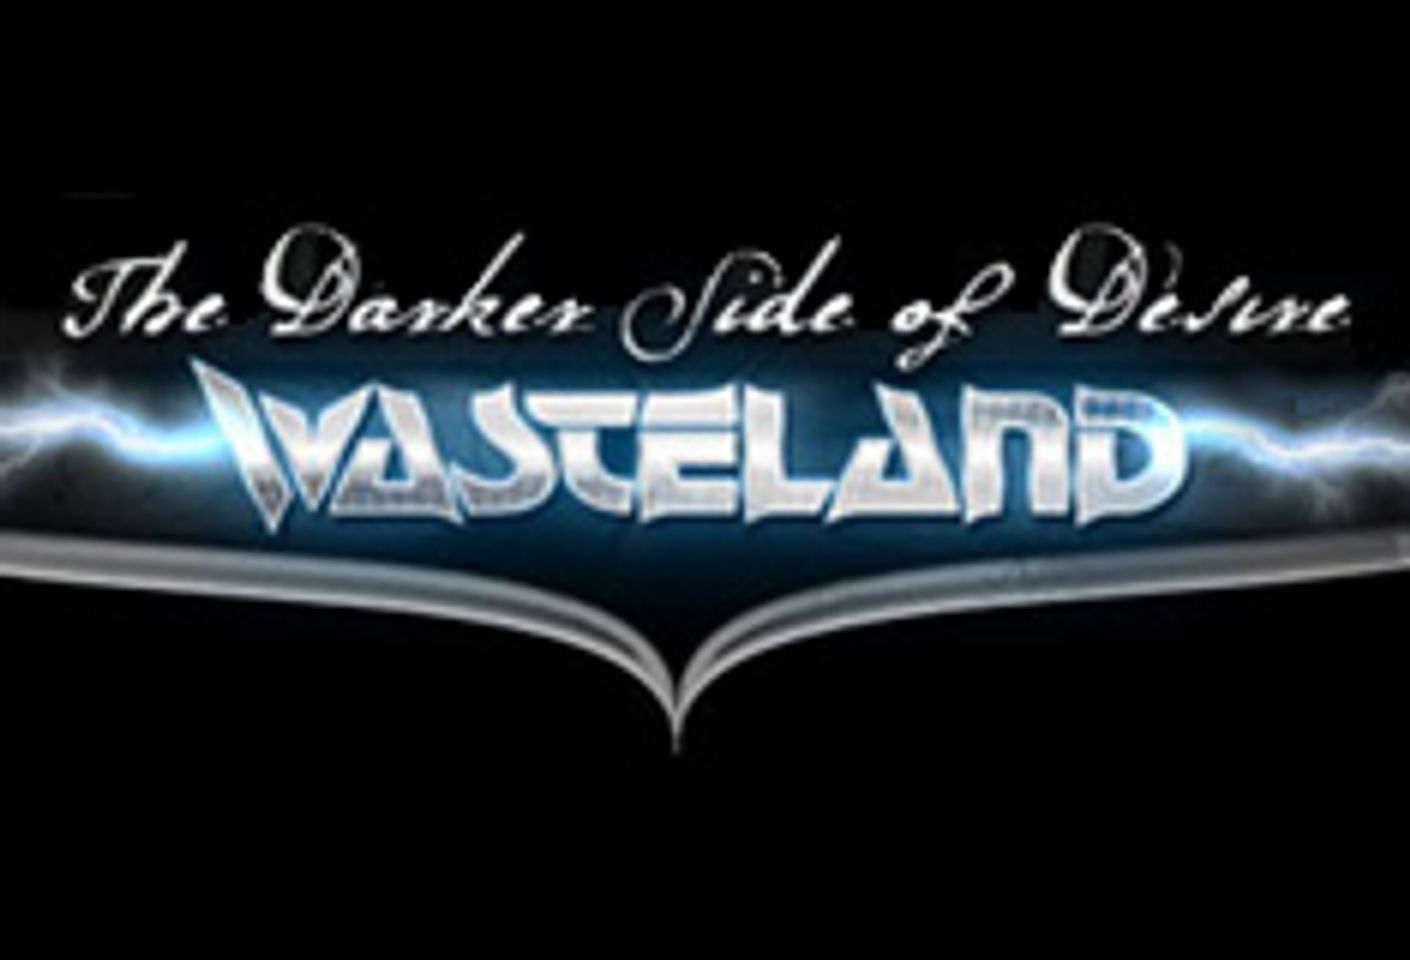 How Wasteland.com Dragged One of Mankind's Oldest Obsessions Into the 21st Century